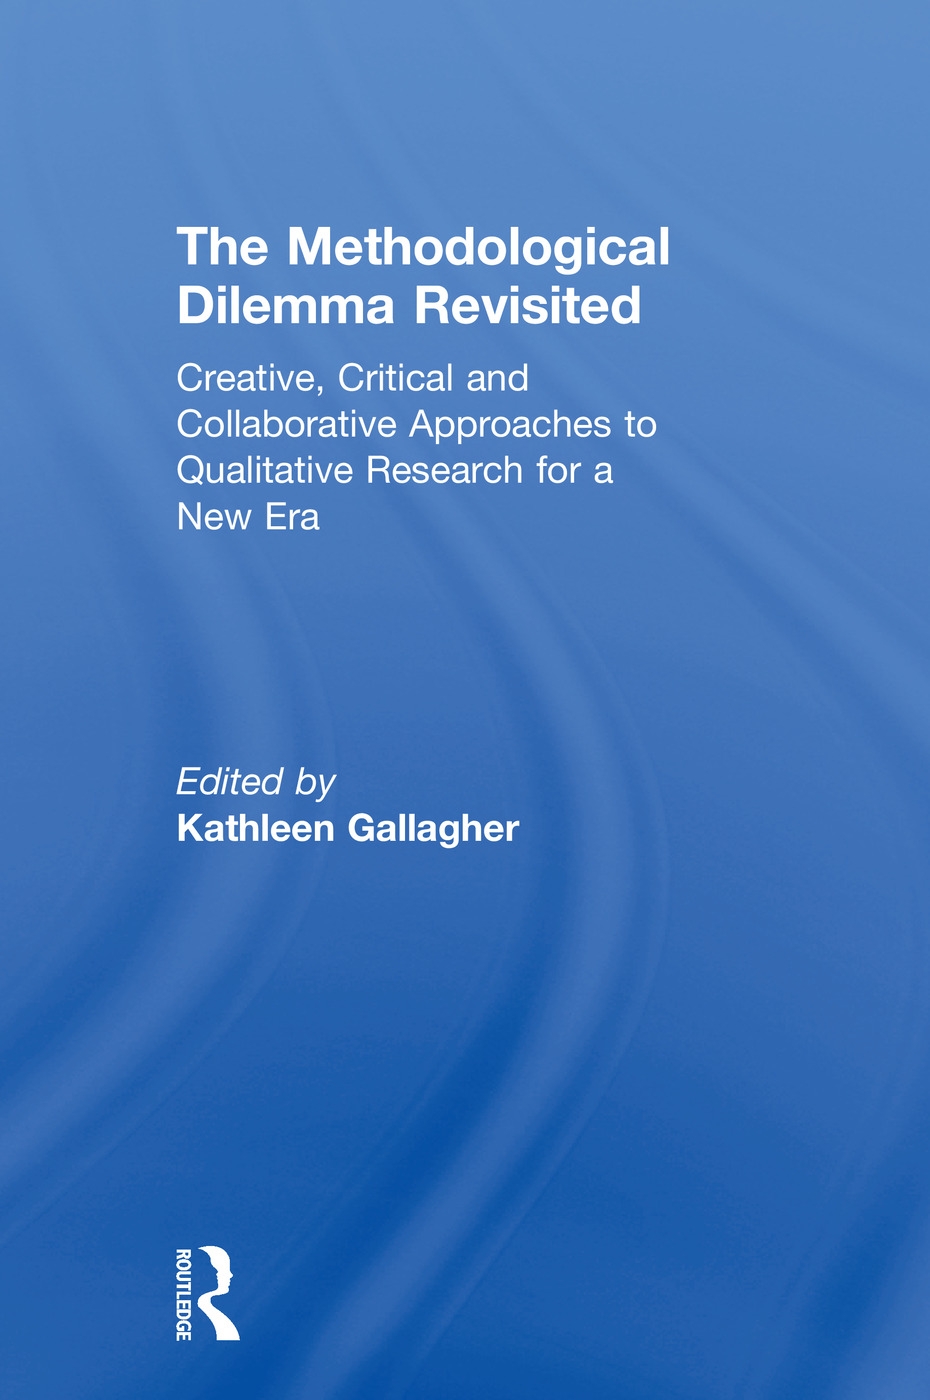 The Methodological Dilemma Revisited: Creative, Critical and Collaborative Approaches to Qualitative Research for a New Era